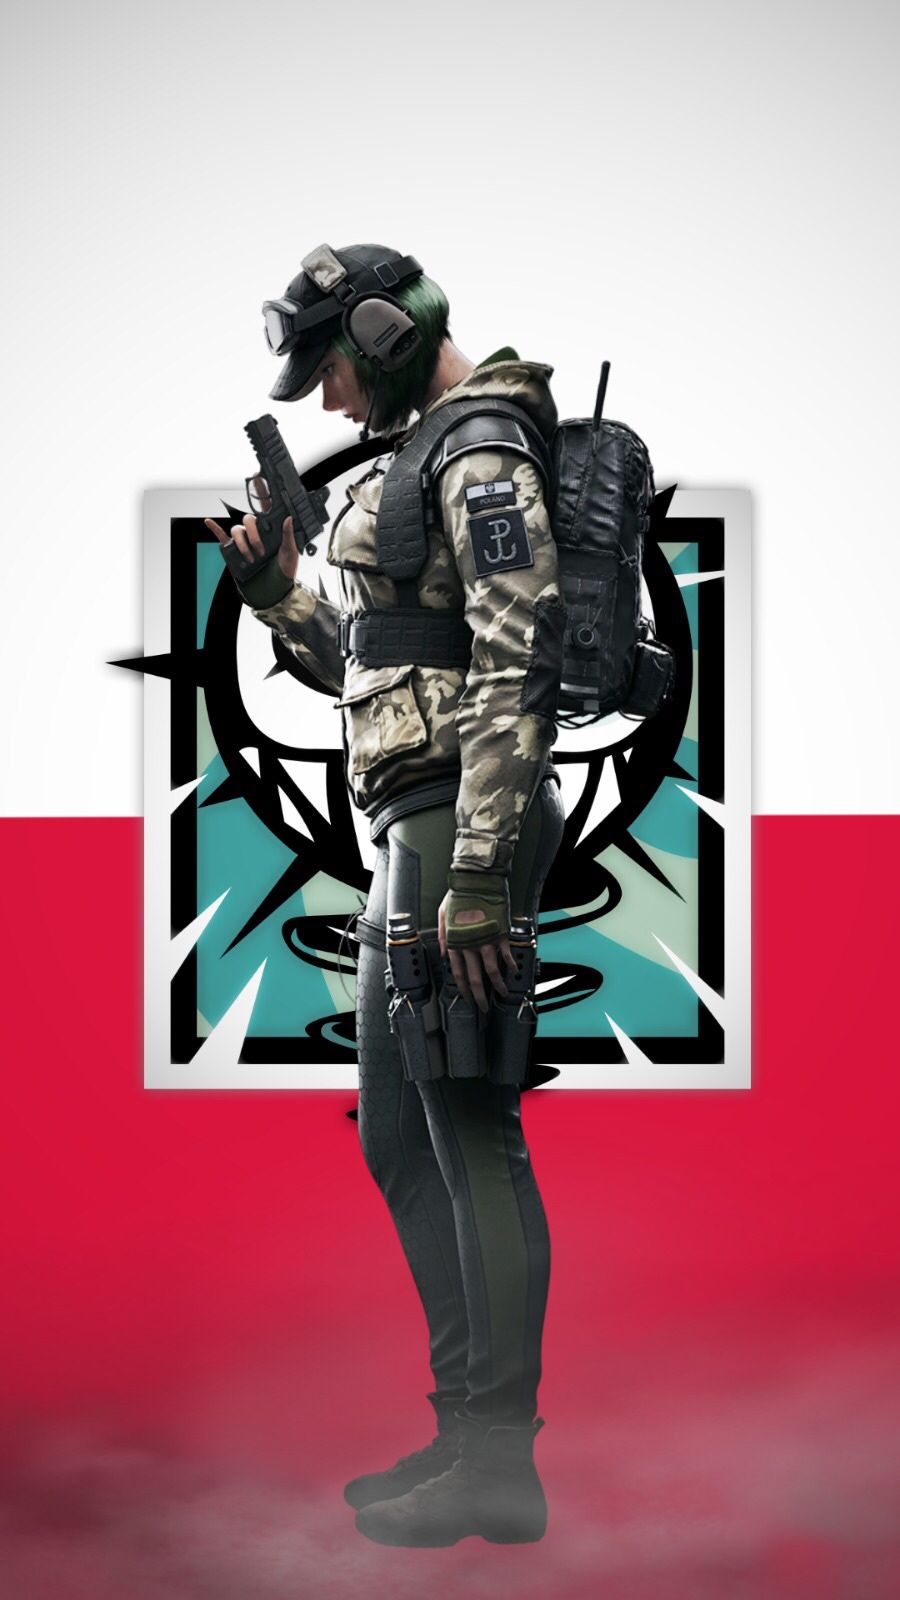 Rainbow Six Siege Phone Wallpaper tell me in the comments what